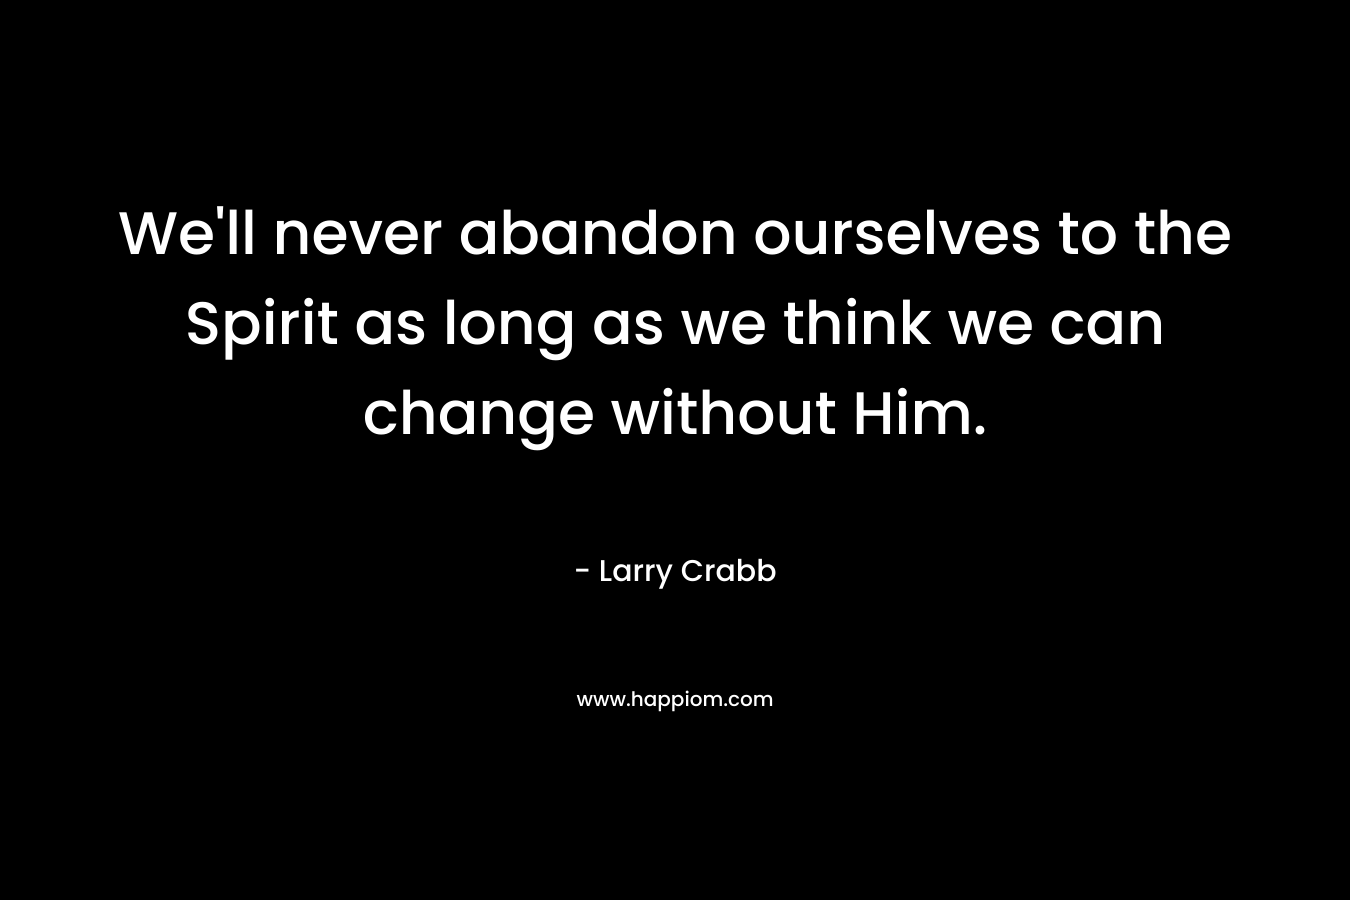 We'll never abandon ourselves to the Spirit as long as we think we can change without Him.